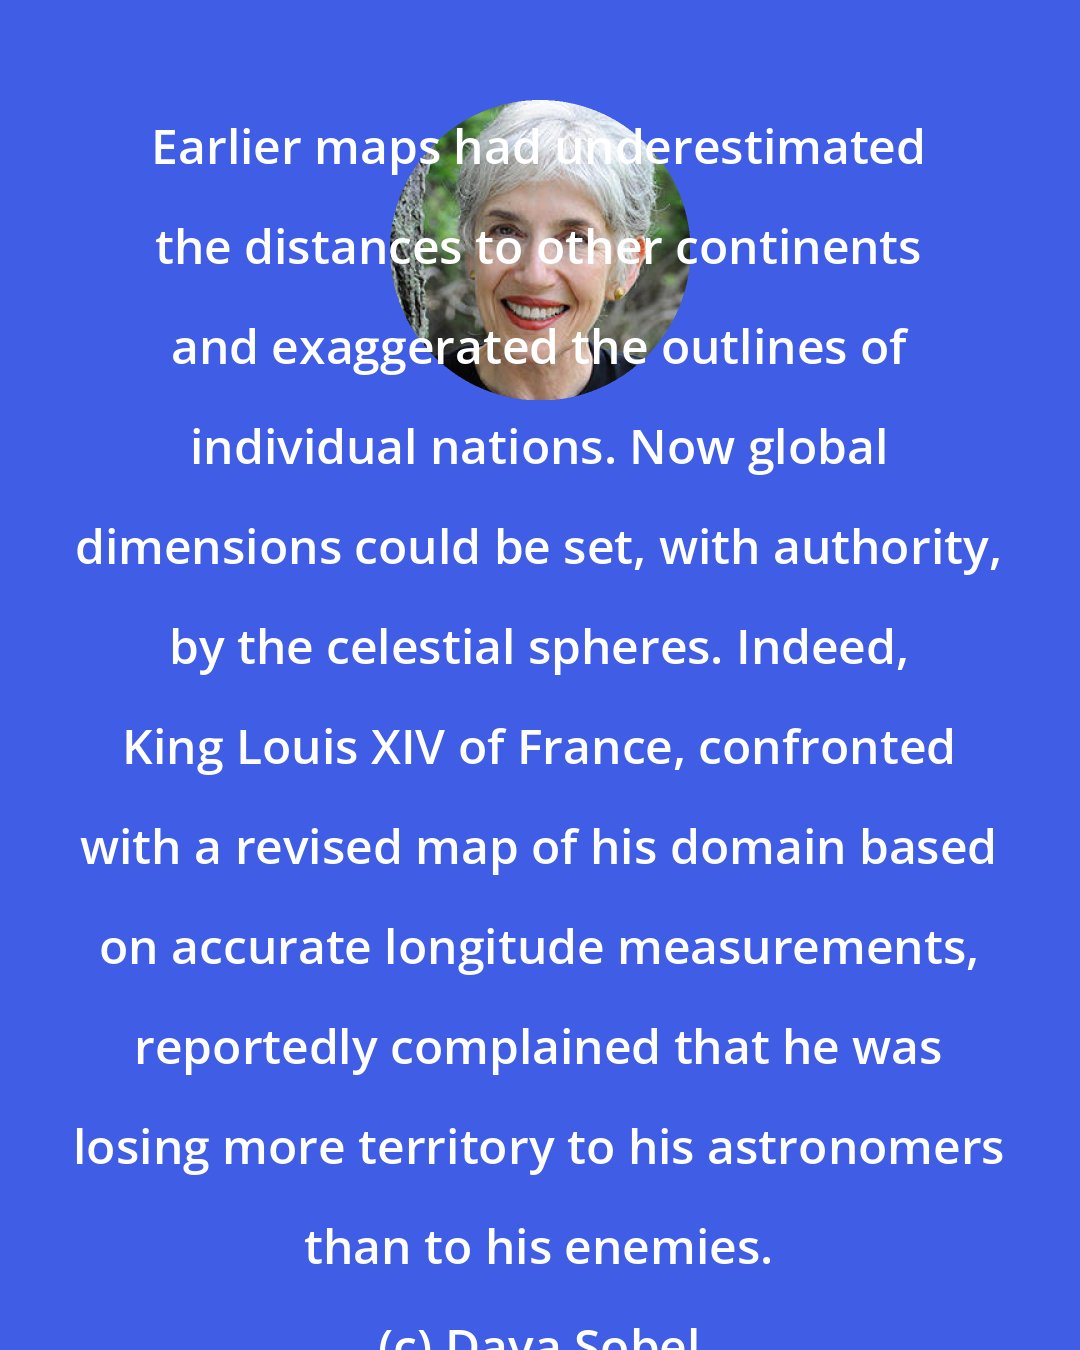 Dava Sobel: Earlier maps had underestimated the distances to other continents and exaggerated the outlines of individual nations. Now global dimensions could be set, with authority, by the celestial spheres. Indeed, King Louis XIV of France, confronted with a revised map of his domain based on accurate longitude measurements, reportedly complained that he was losing more territory to his astronomers than to his enemies.